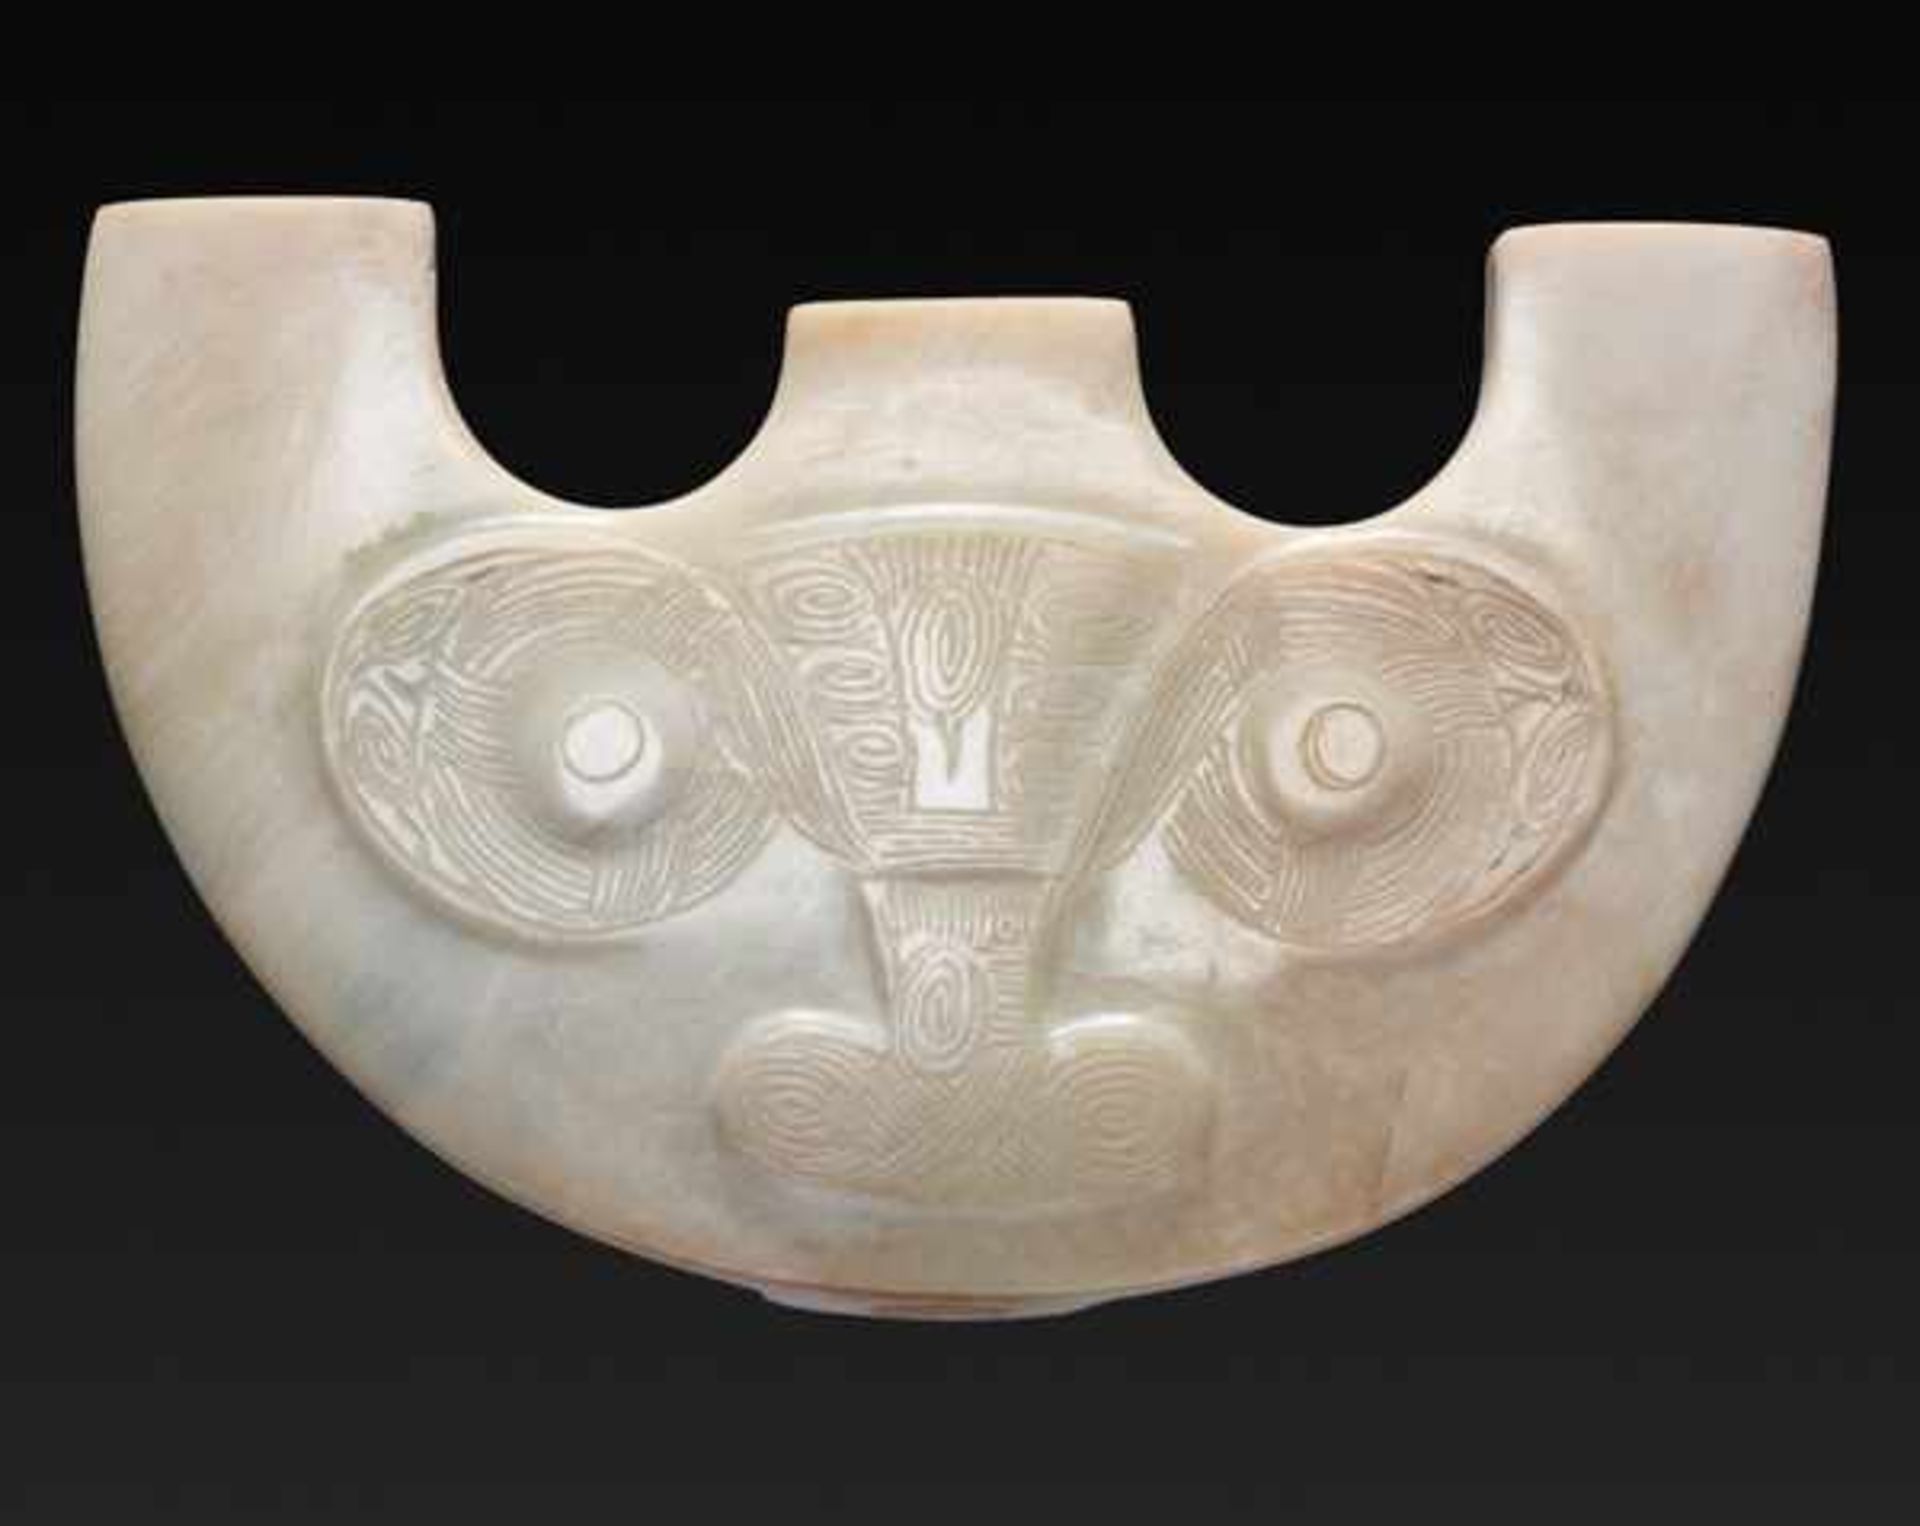 A RARE THREE-PRONGED ORNAMENT WITH ANIMAL MASK MOTIF Jade, China. Late Neolithic period, Liangzhu